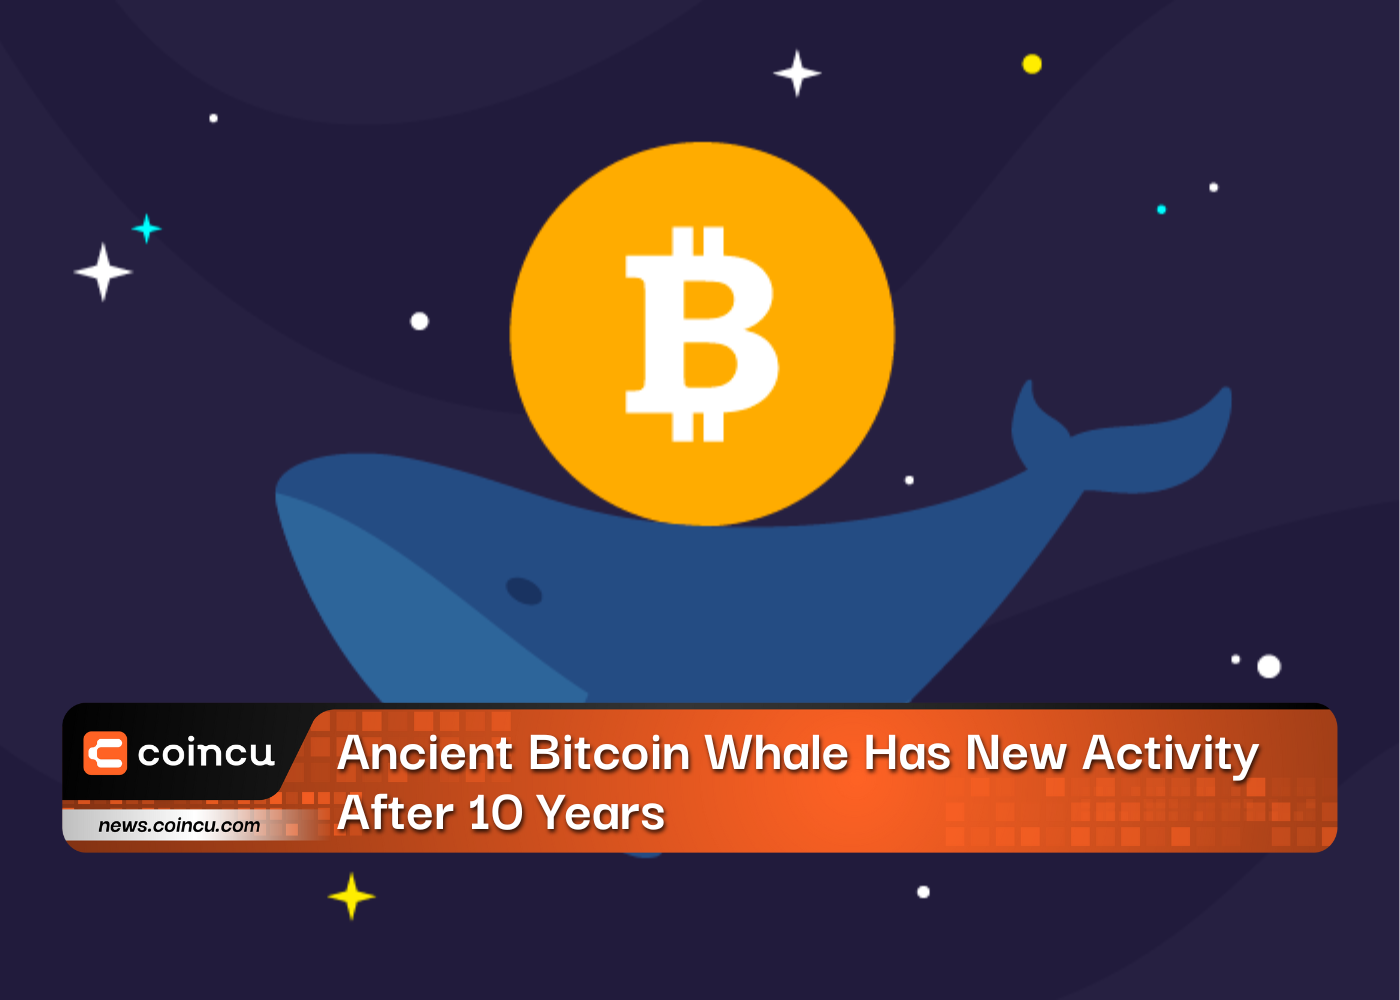 Ancient Bitcoin Whale Has New Activity After 10 Years